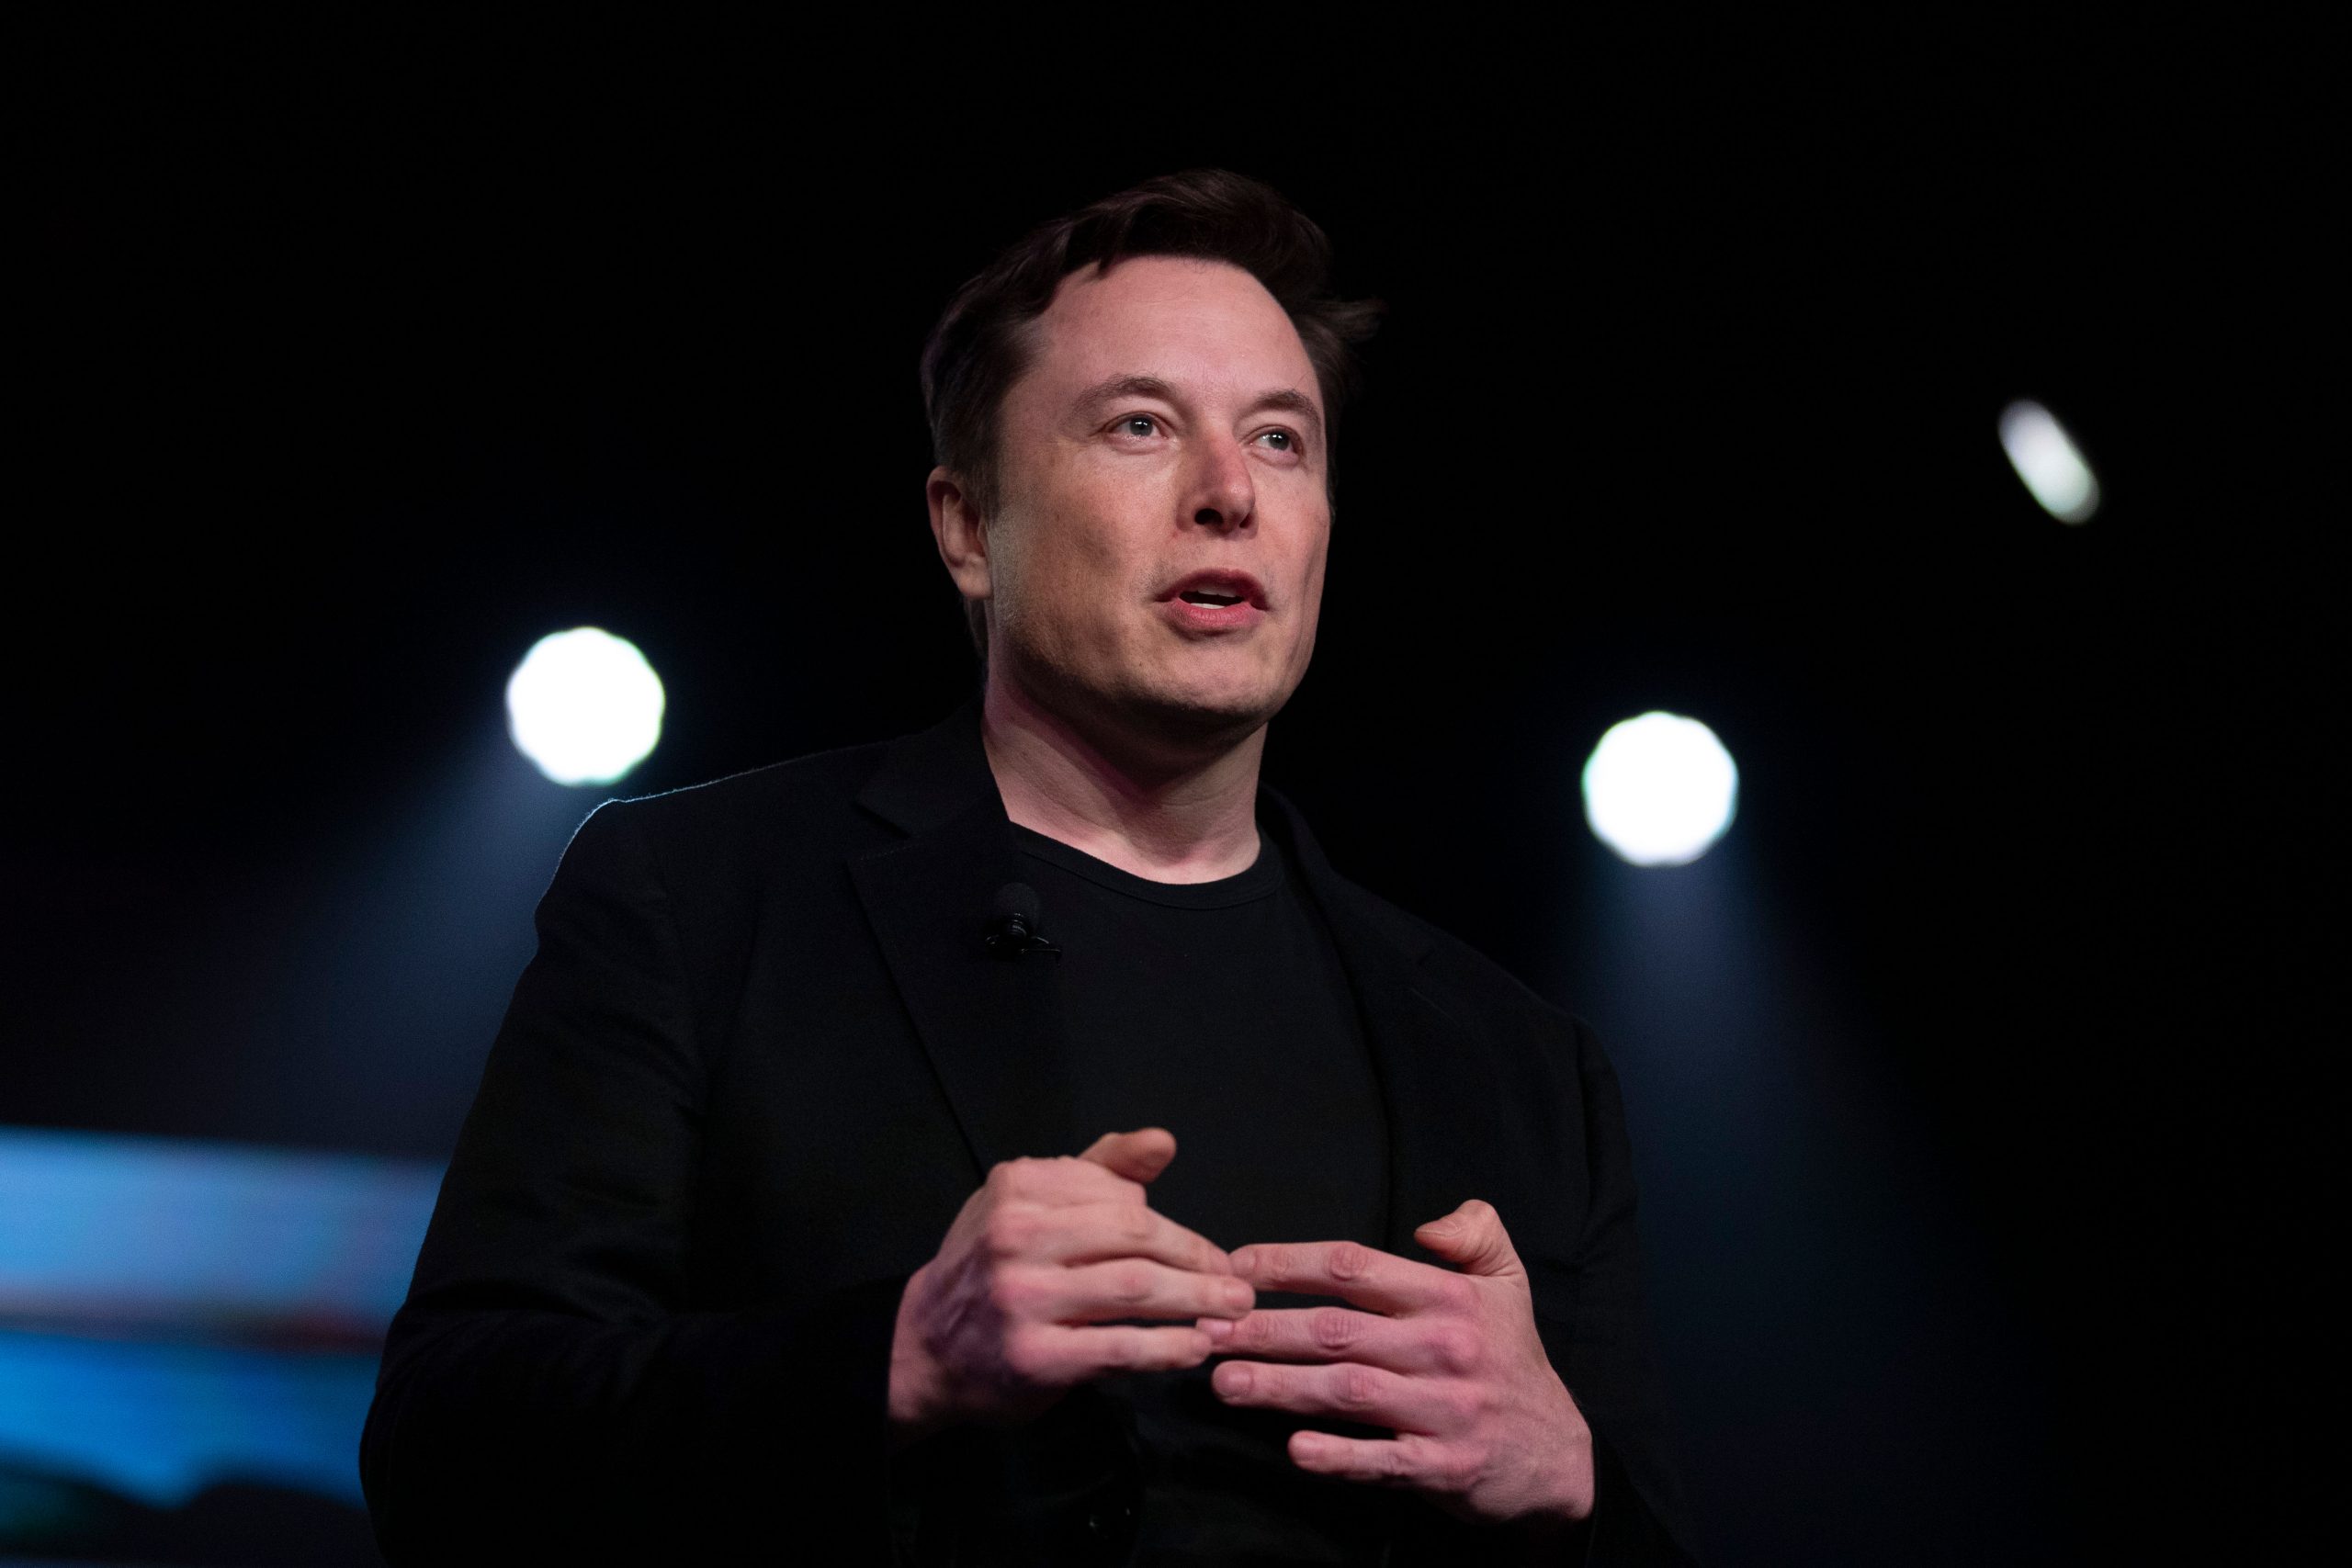 Elon Musk agrees to sell 10% Tesla shares after Twitter poll result